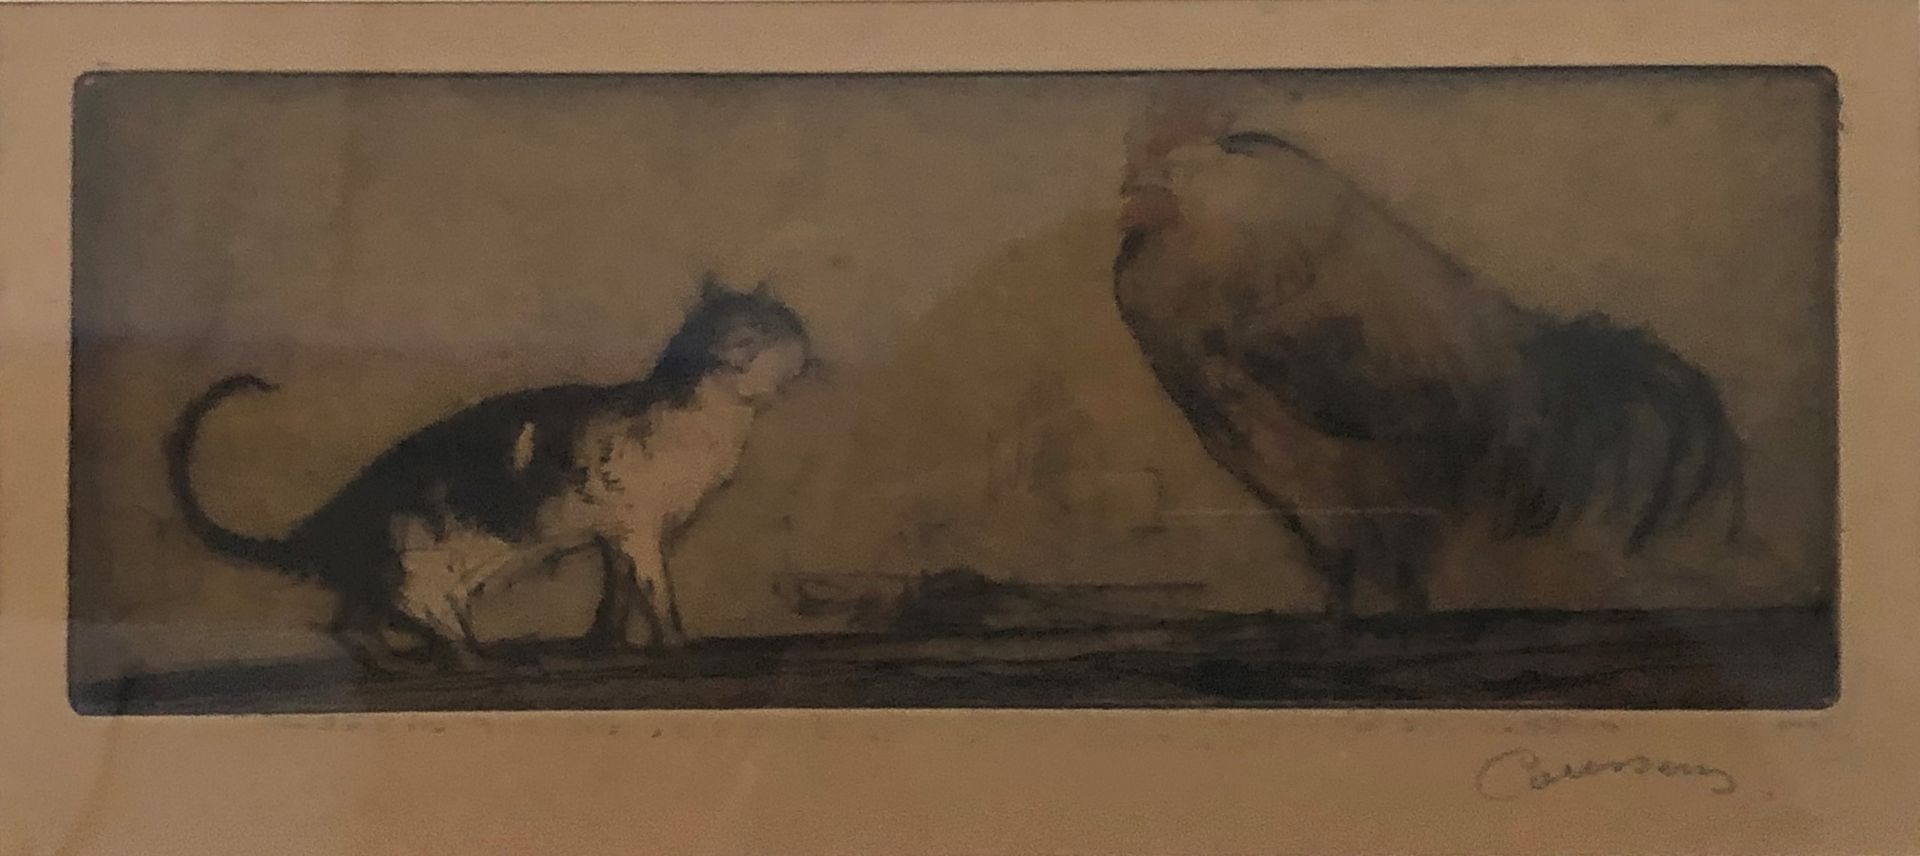 Null Armand COUSSENS (1881-1935)

The cat and the rooster.

Polychrome engraving&hellip;